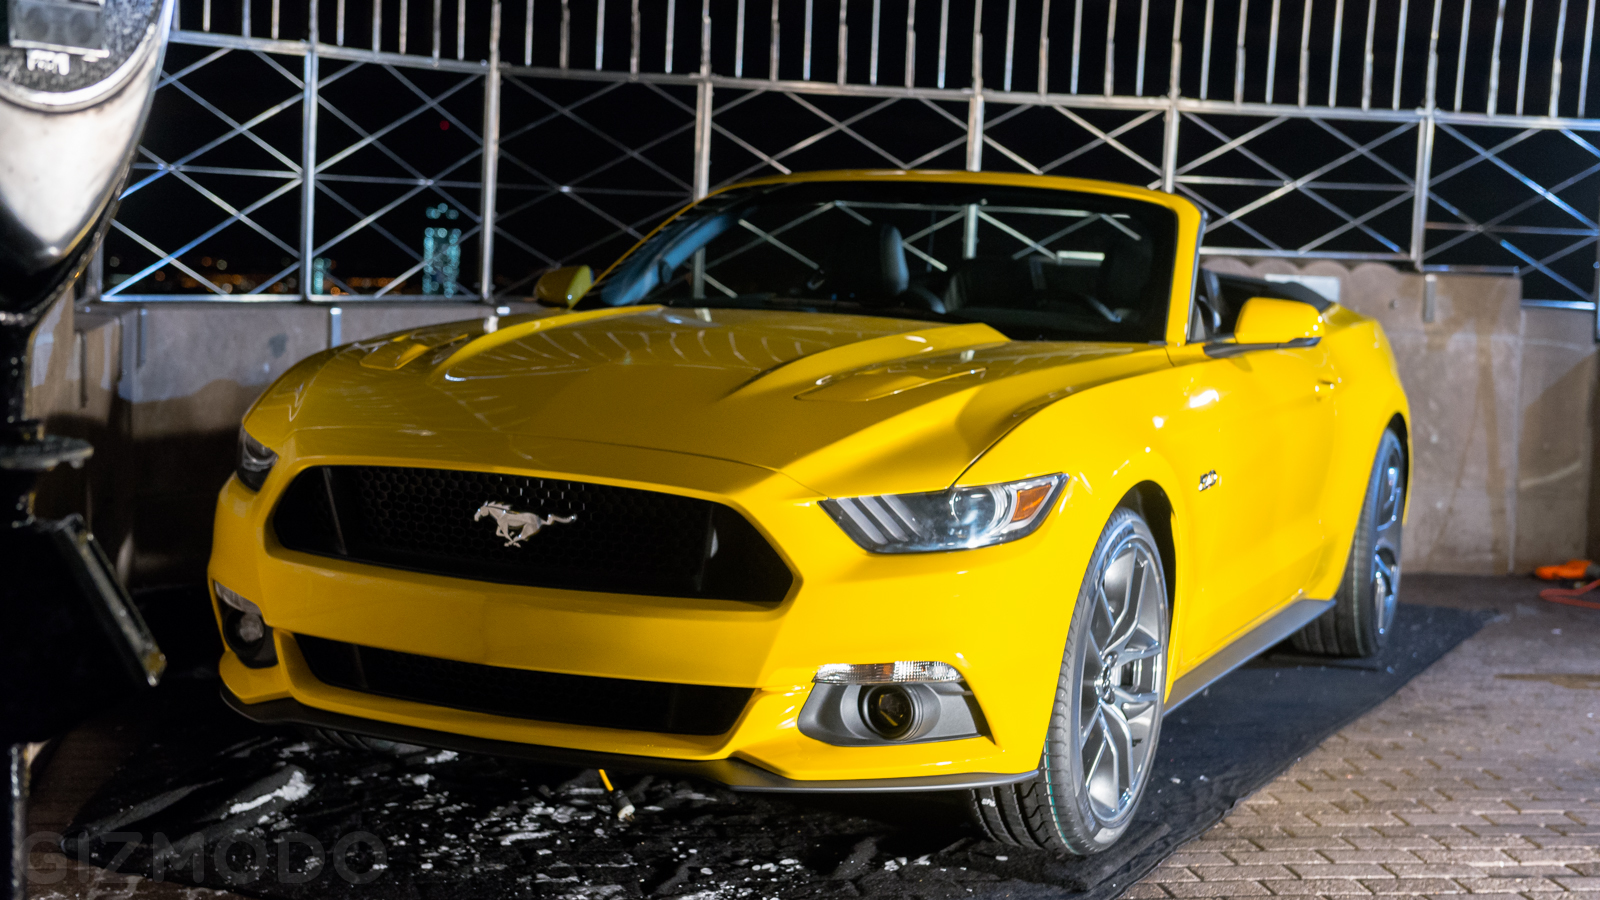 Ford Built A Mustang On Top Of The Empire State Building Last Night